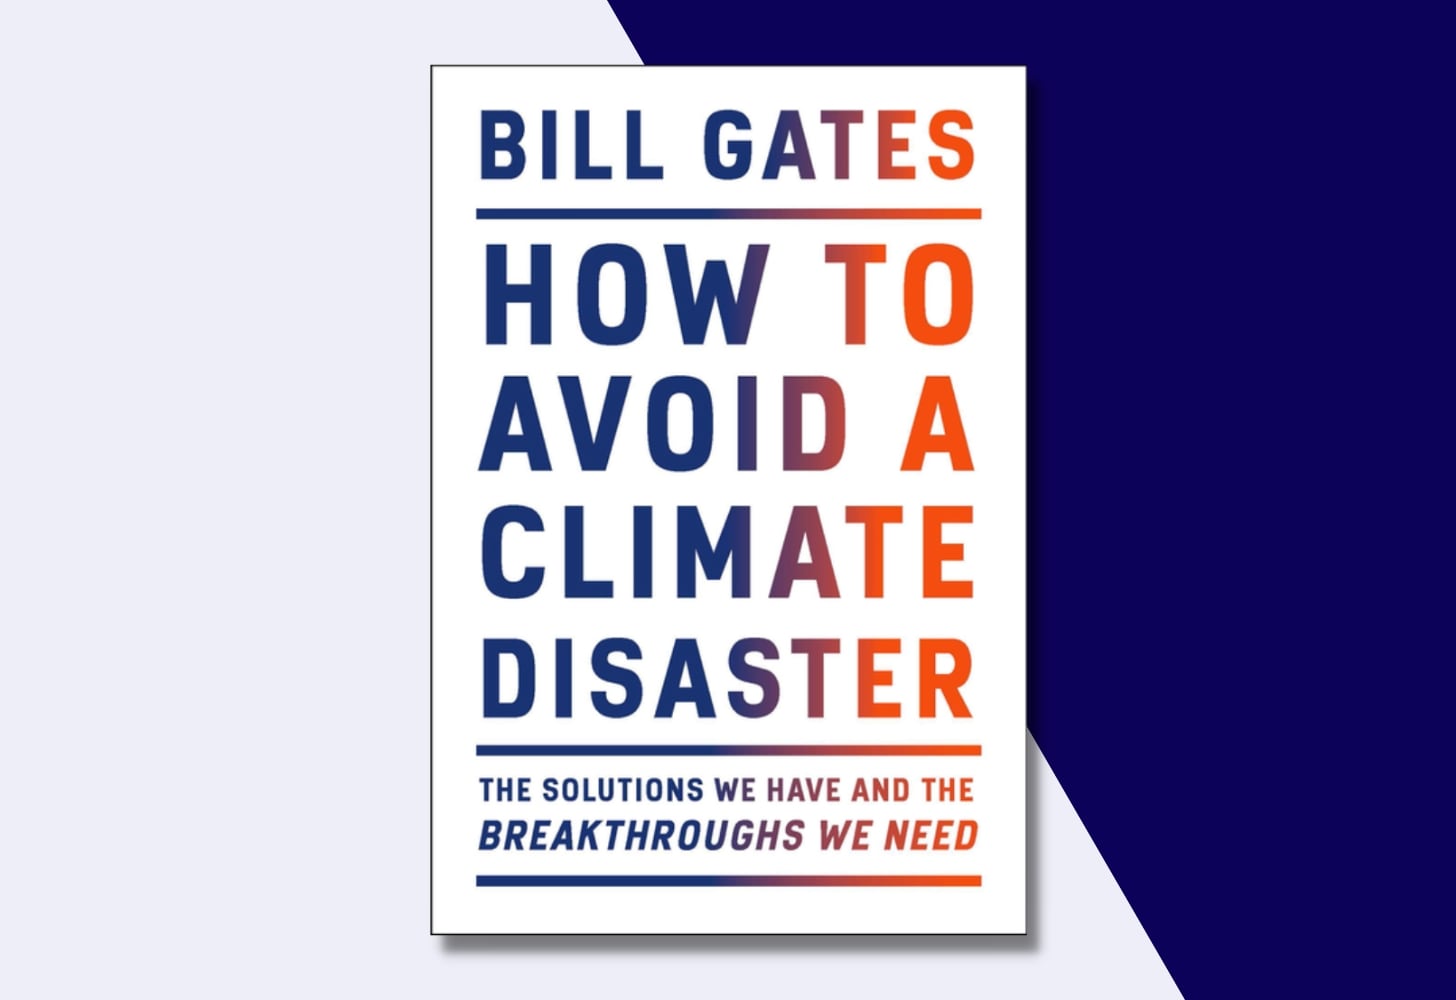 “How to Avoid a Climate Disaster: The Solutions We Have and the Breakthroughs We Need” by Bill Gates